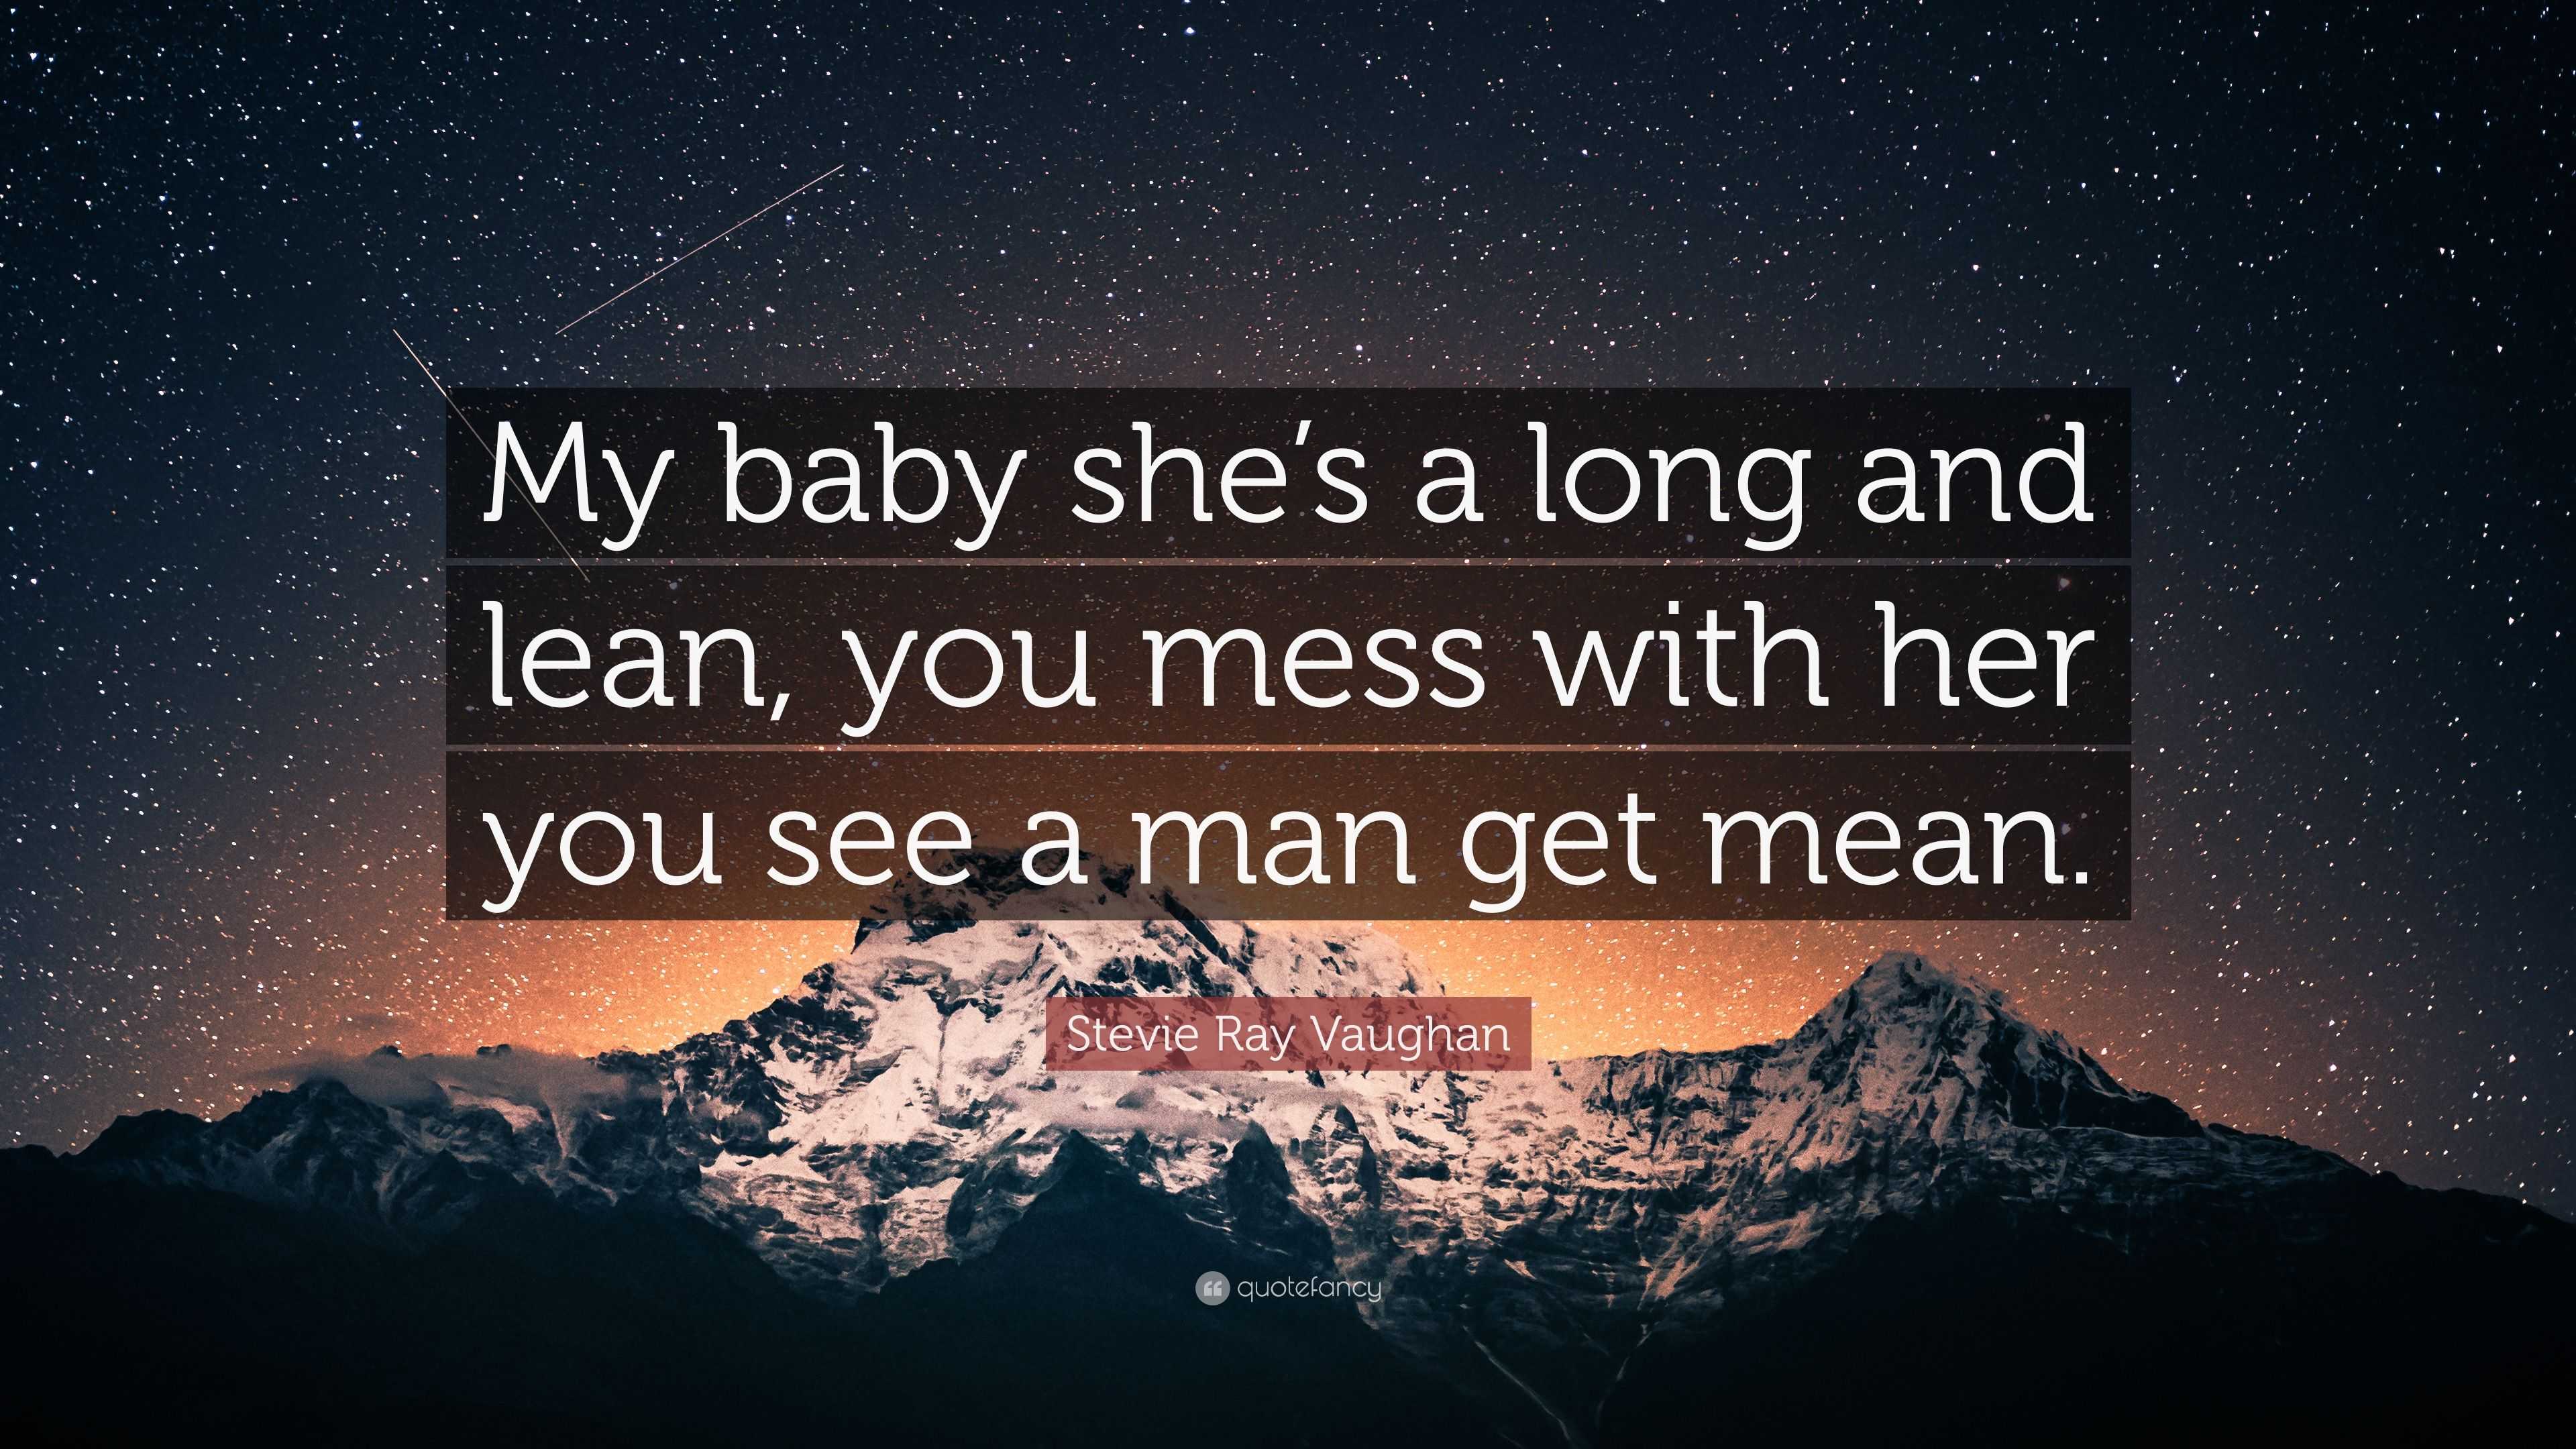 Stevie Ray Vaughan Quote: “My baby she’s a long and lean, you mess with ...